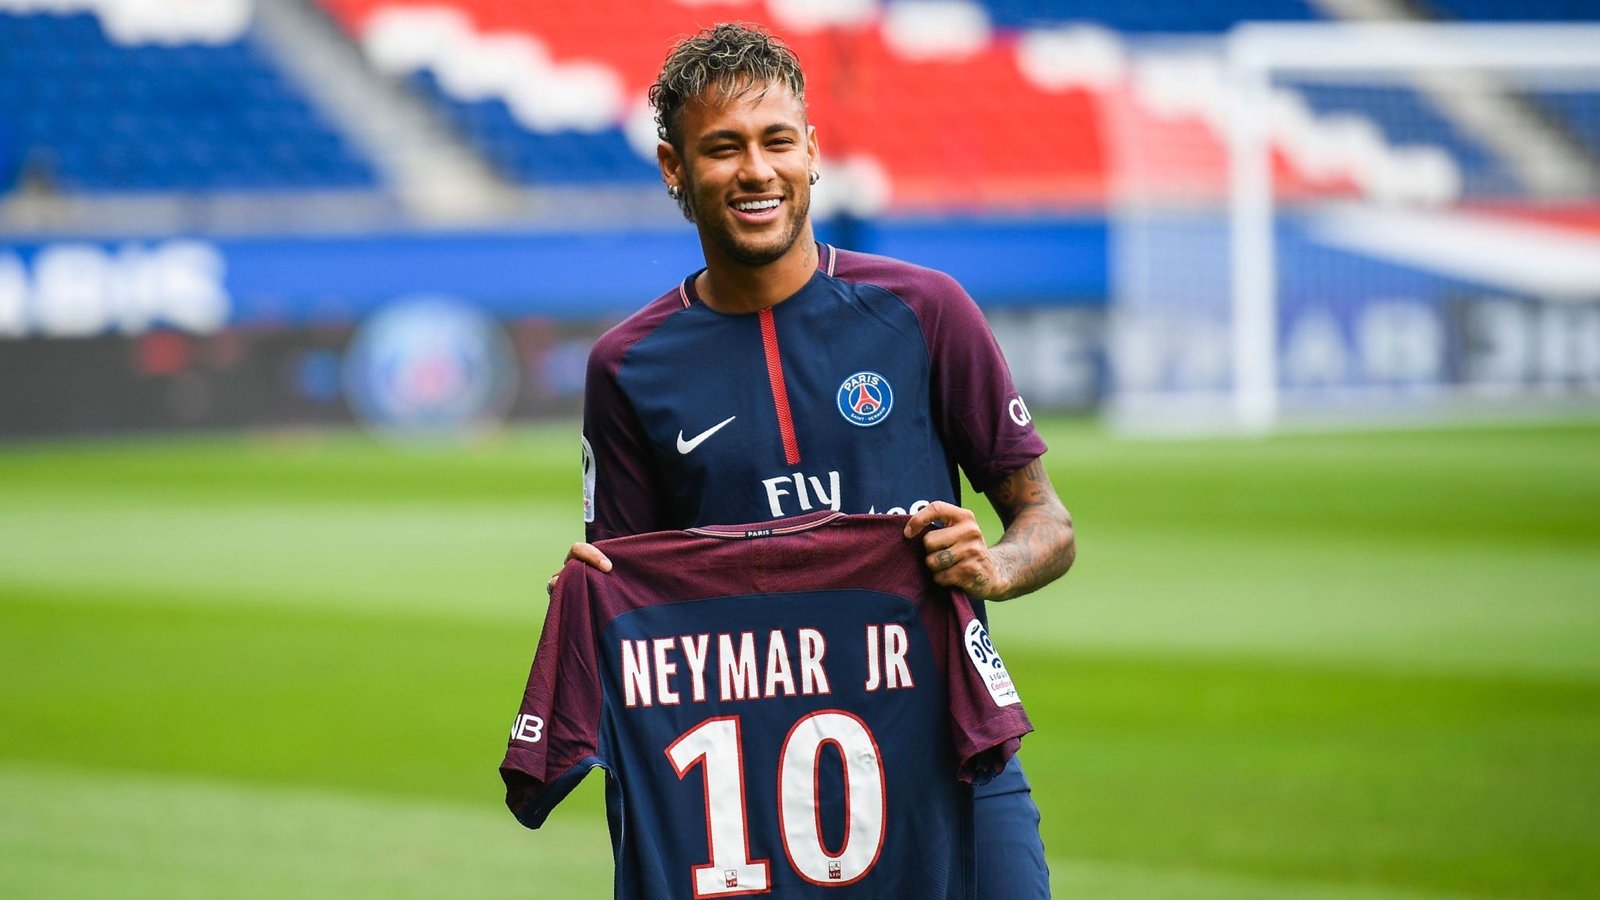 90+1 Facts About Neymar